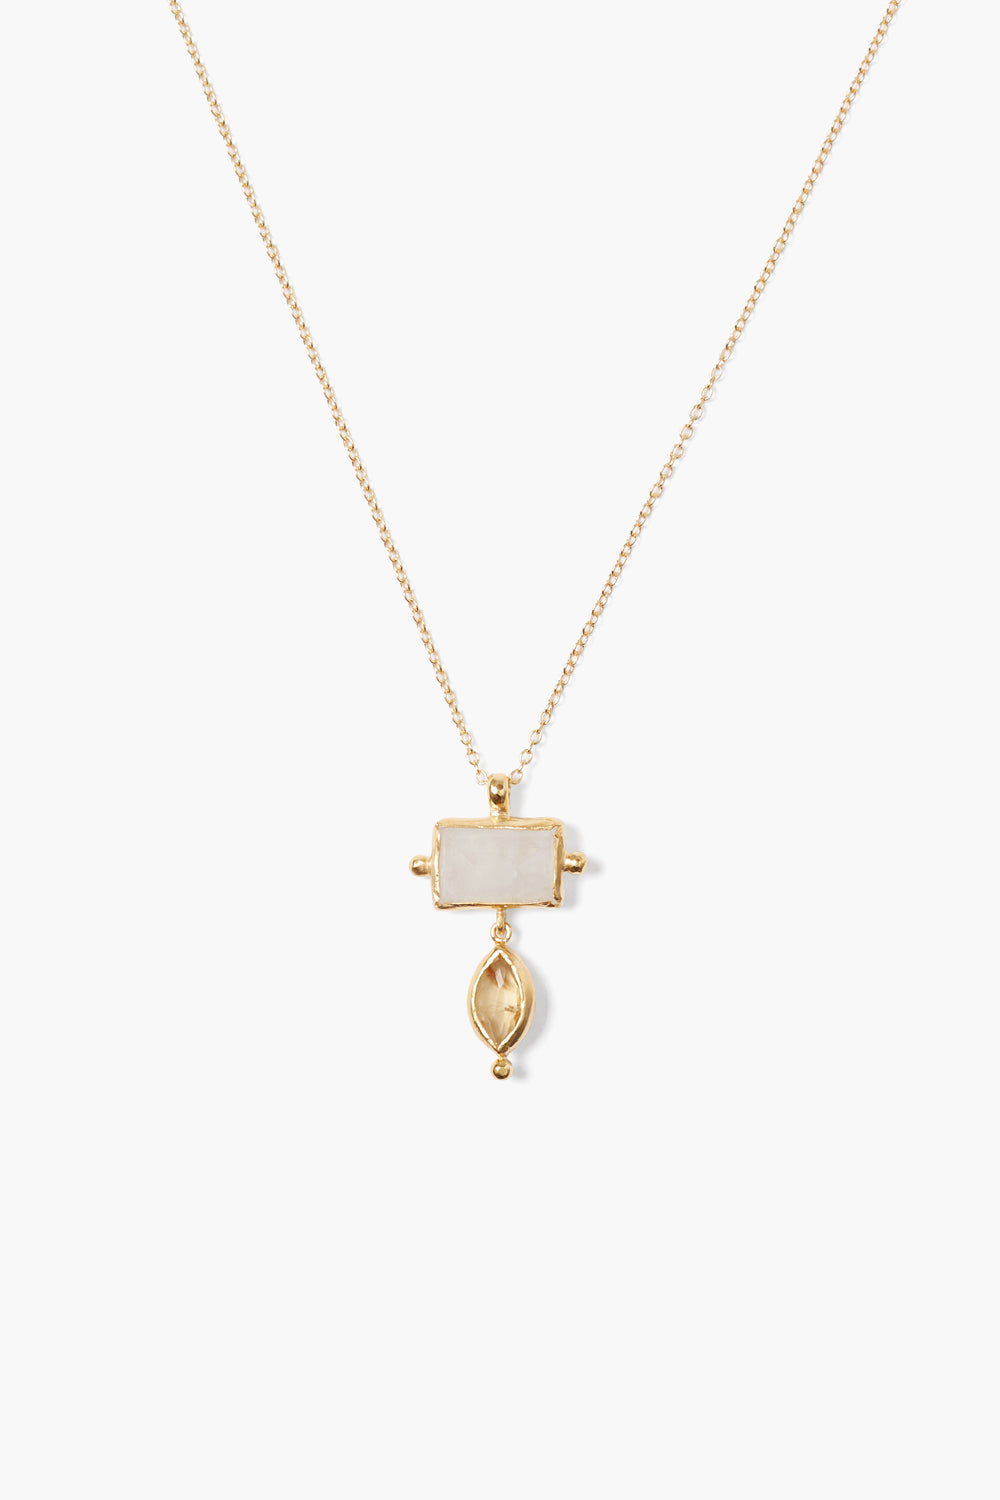 Chan Luu Levi Necklace Moonstone Mix - Dear Lucy